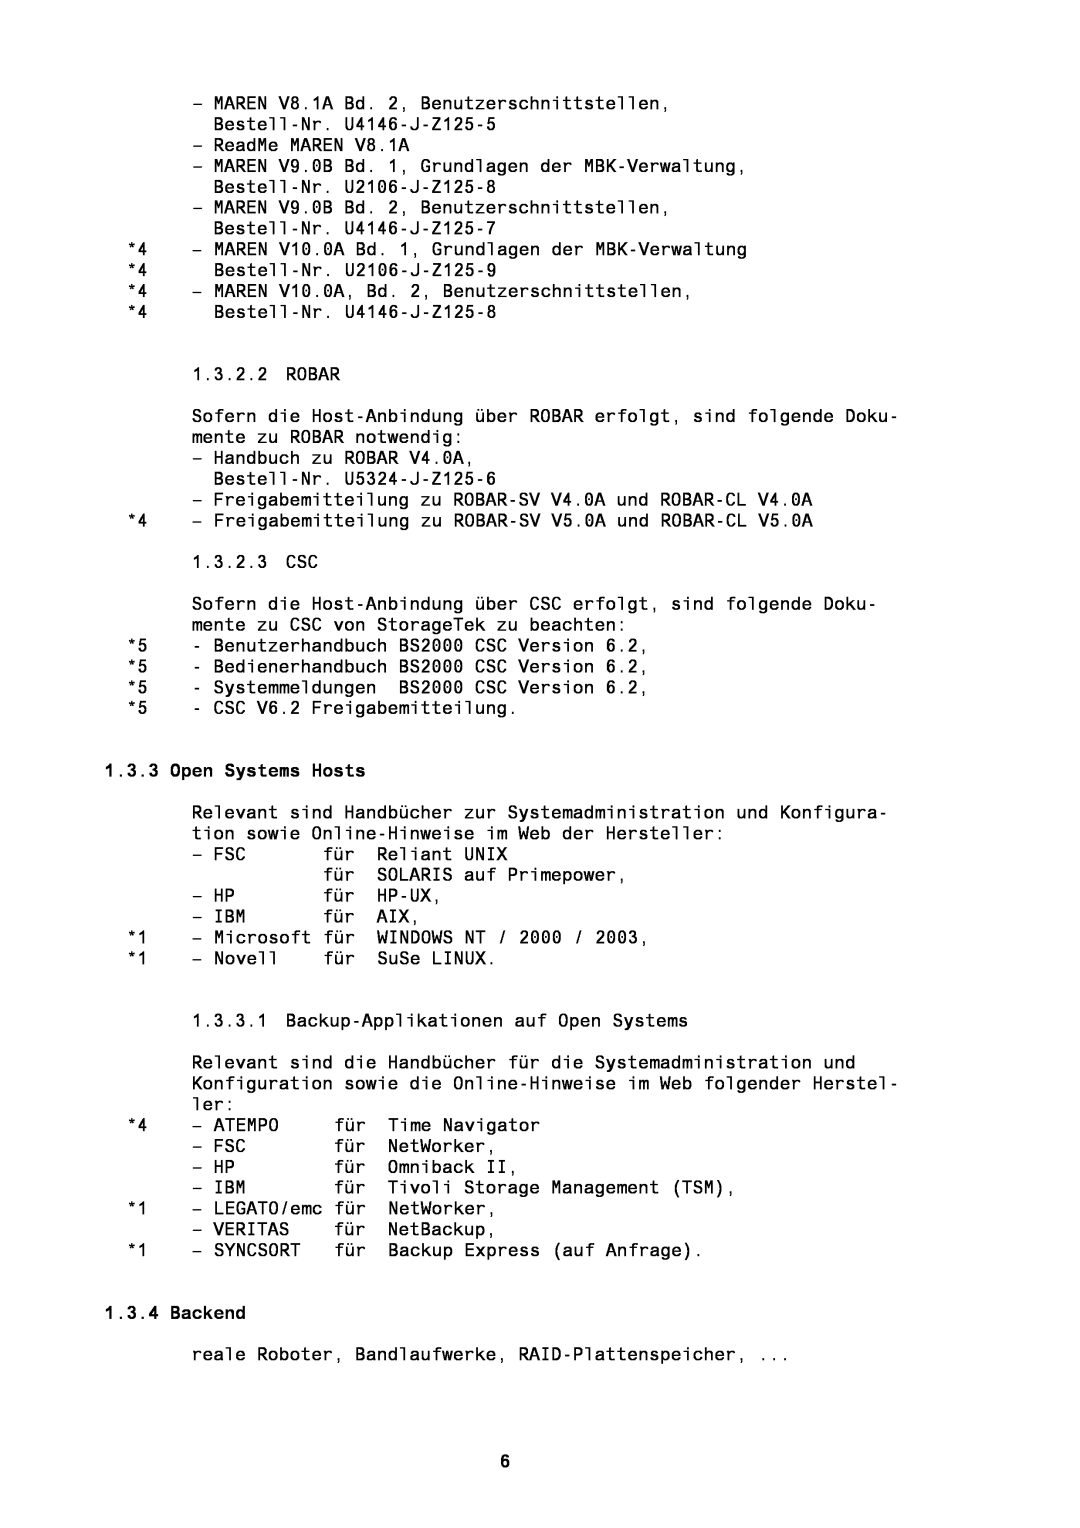 Fujitsu BS2000/OSD manual Open Systems Hosts, Backend 